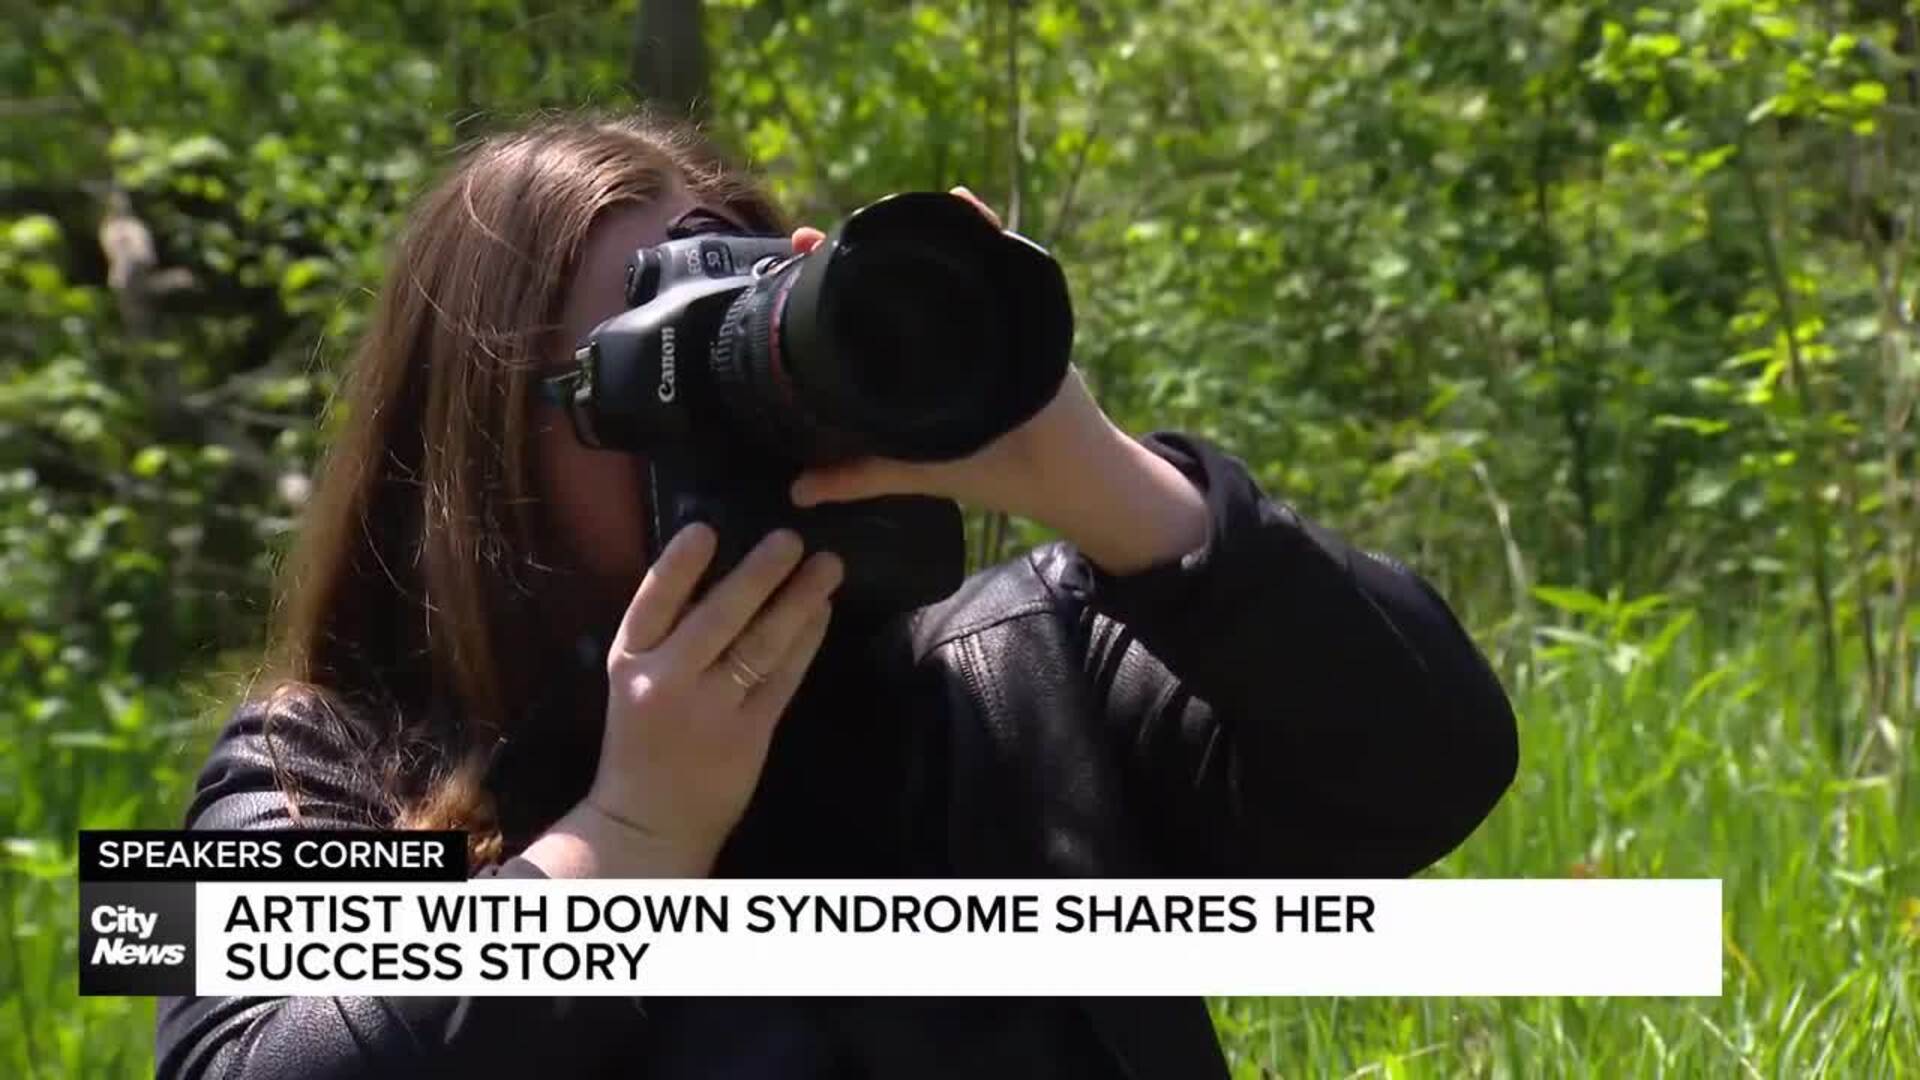 Mississauga Woman, living with Down Syndrome, shares her success story